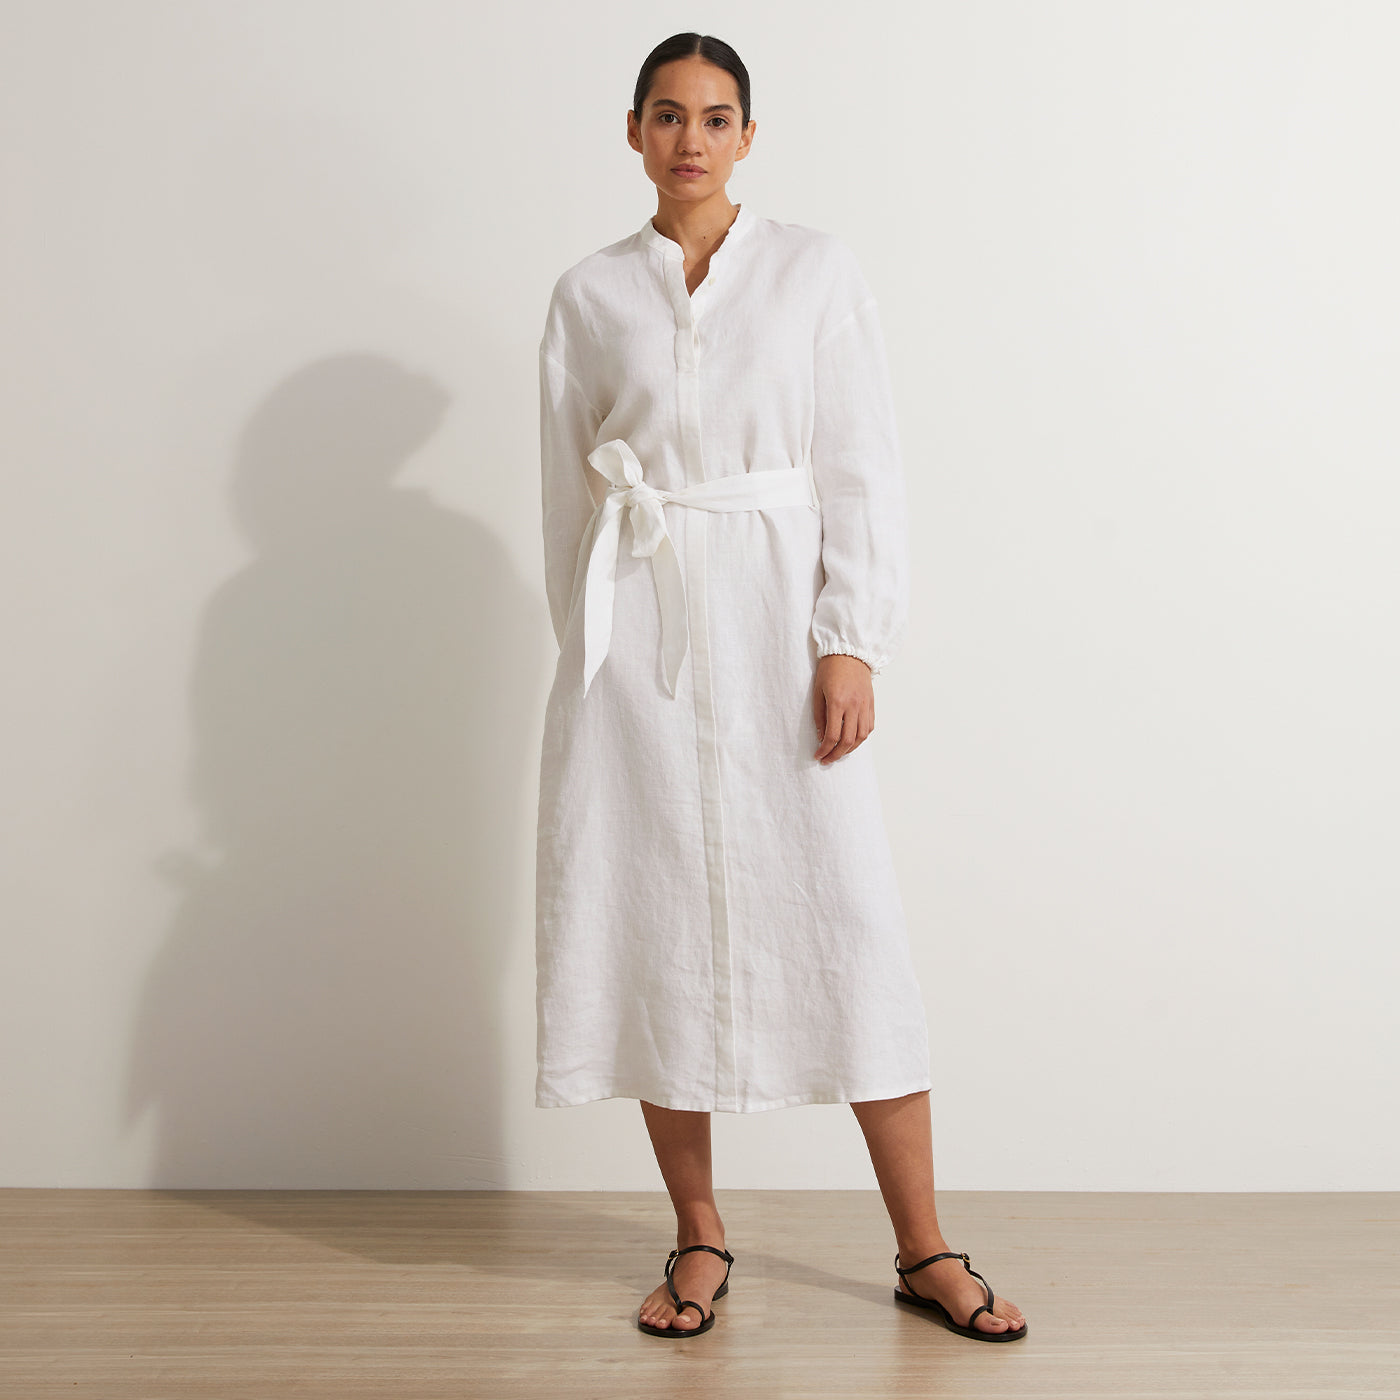 Buy Linen Clothes Online - CULTIVER- CULTIVER- USA